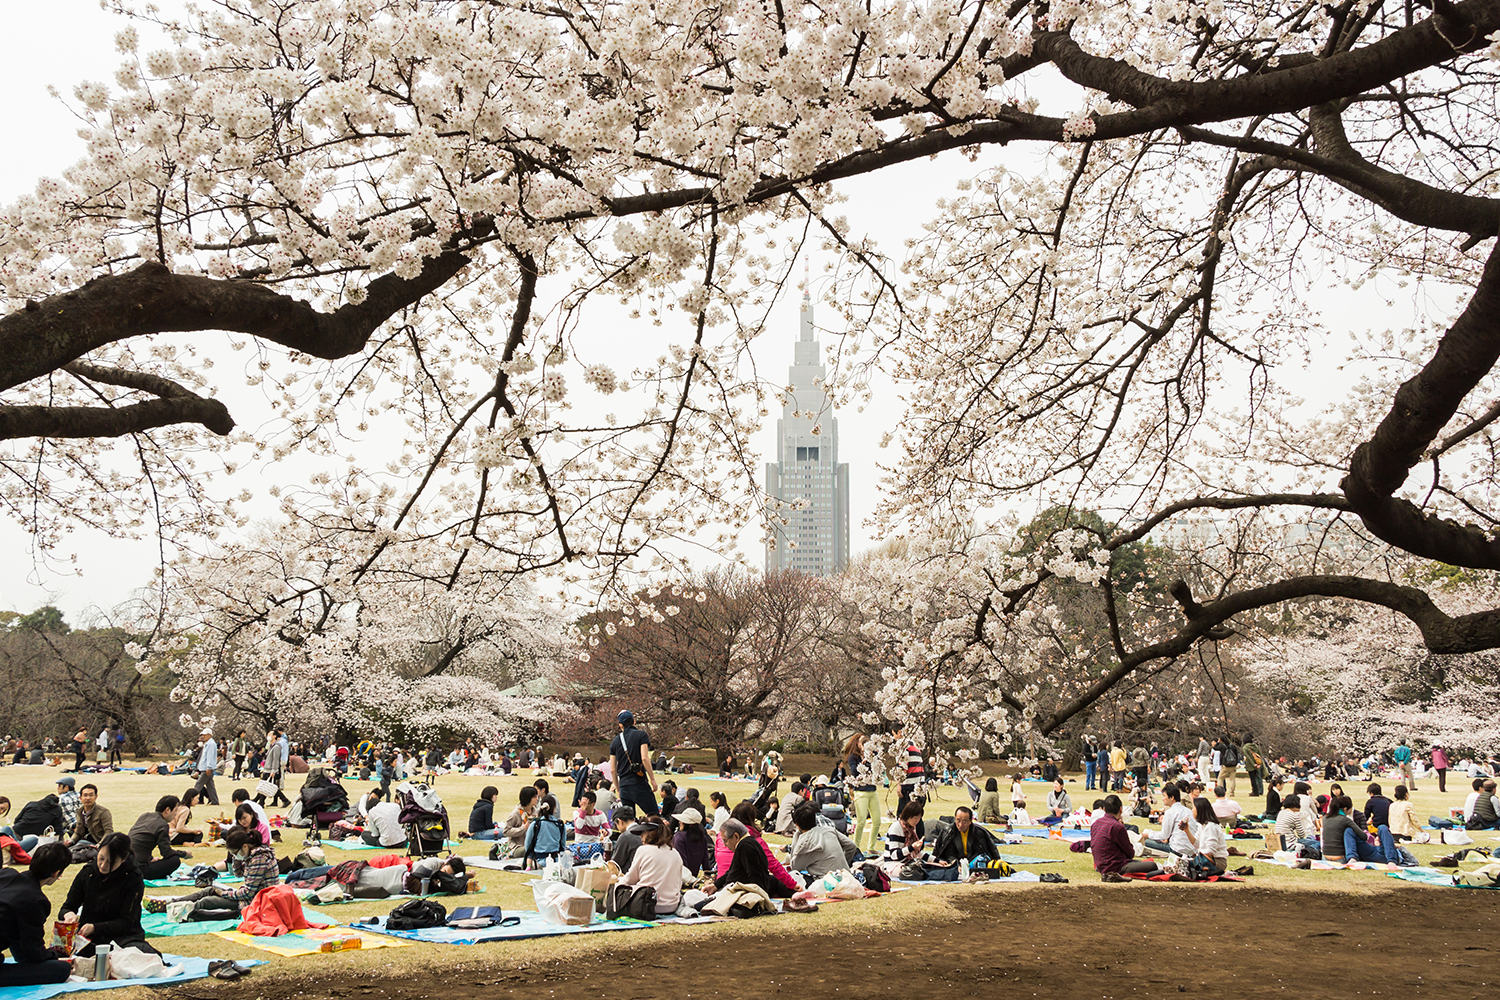 A view of Shinjuku Gyoen Park, with crowds of people enjoying hanami picnis under the cherry blossoms.